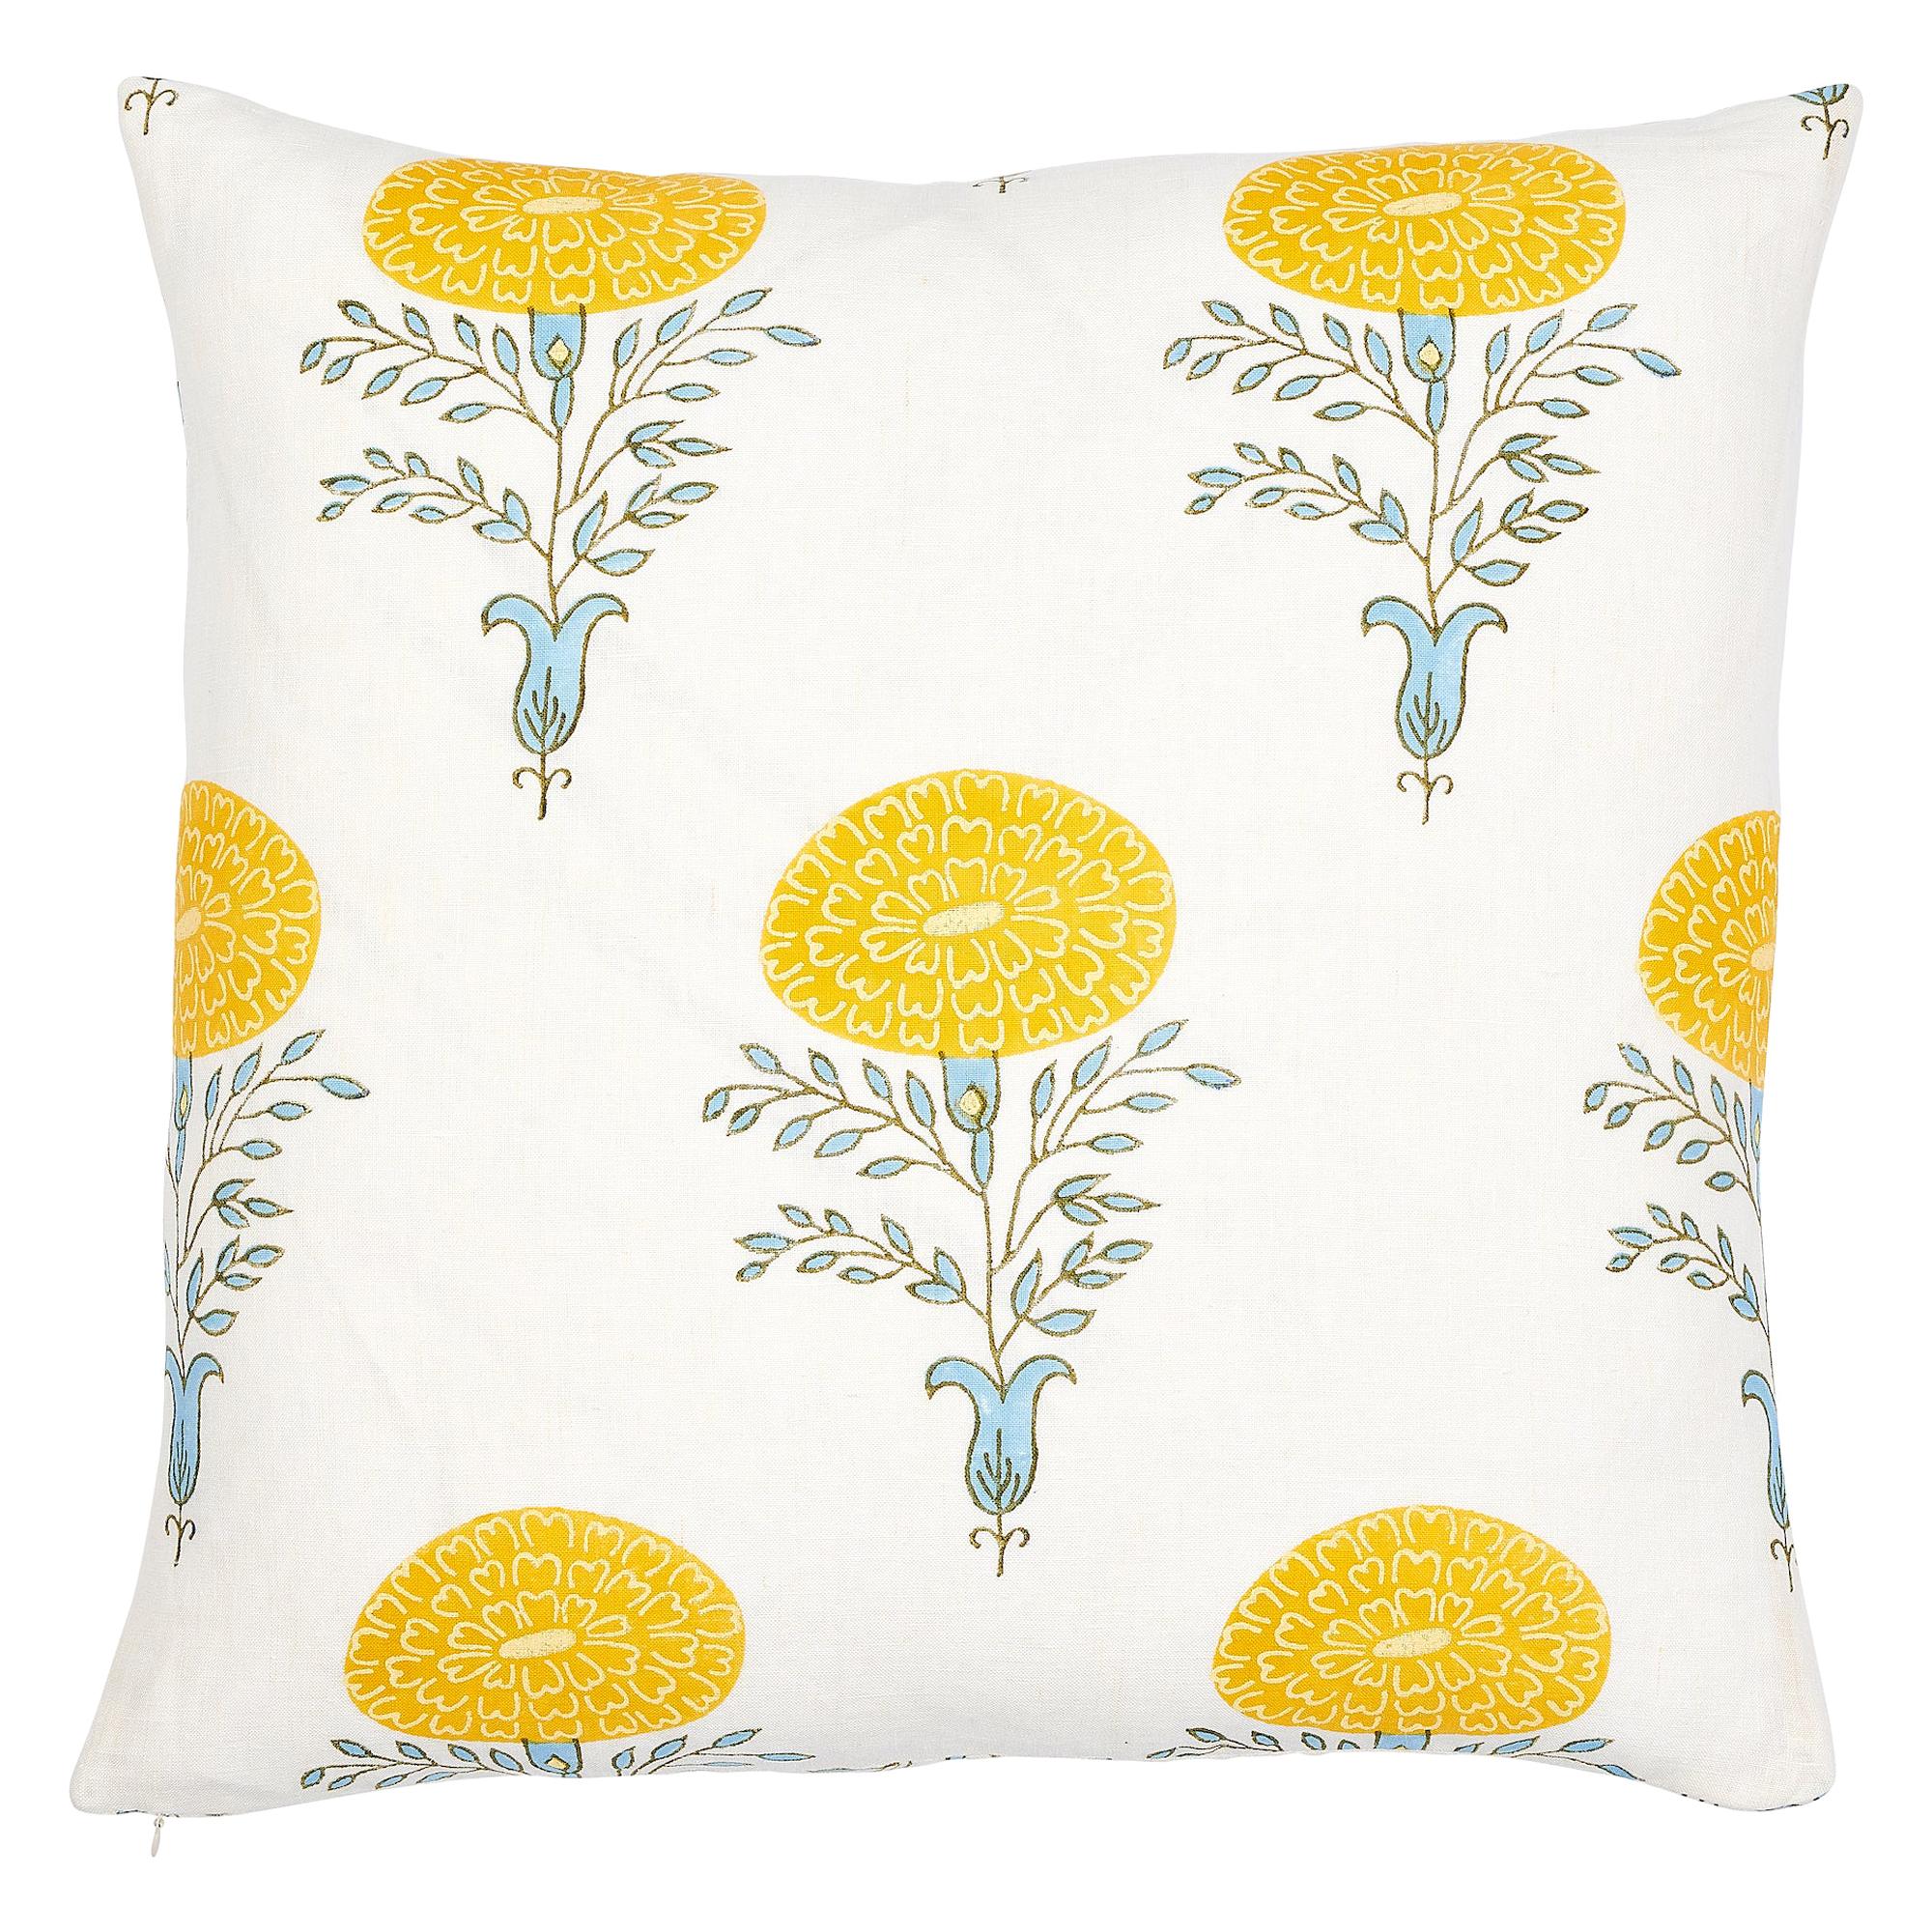 Schumacher x Molly Mahon Marigold 22" Pillow in Yellow For Sale